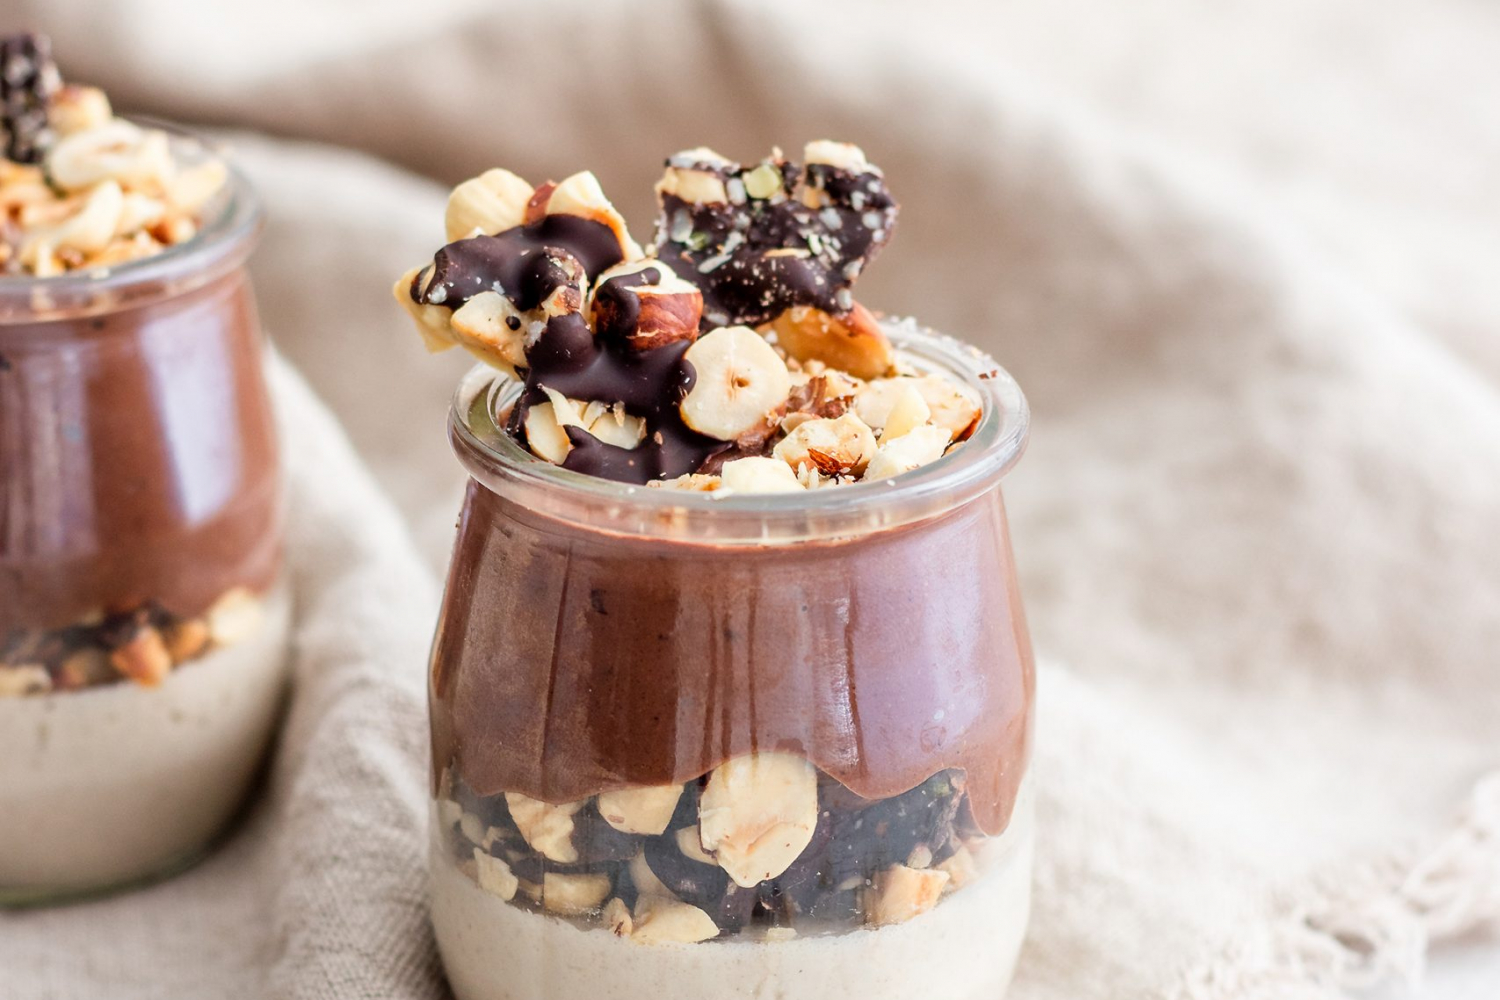 Coconut Panna Cotta with Chocolate Mousse and Hazelnut Crunch